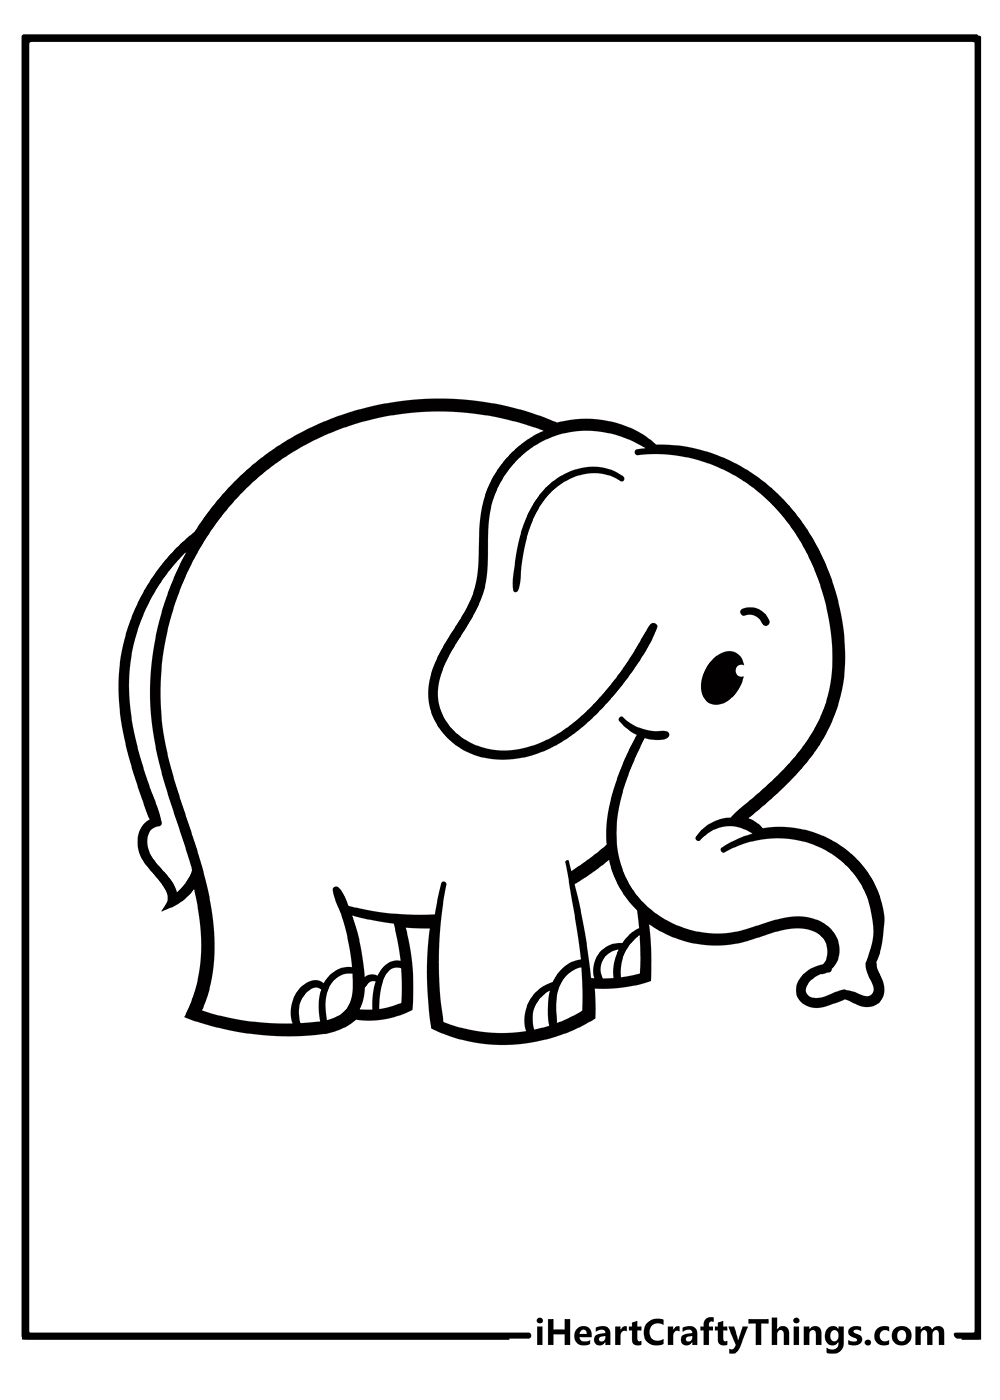 Elephant Coloring Pages free pdf download